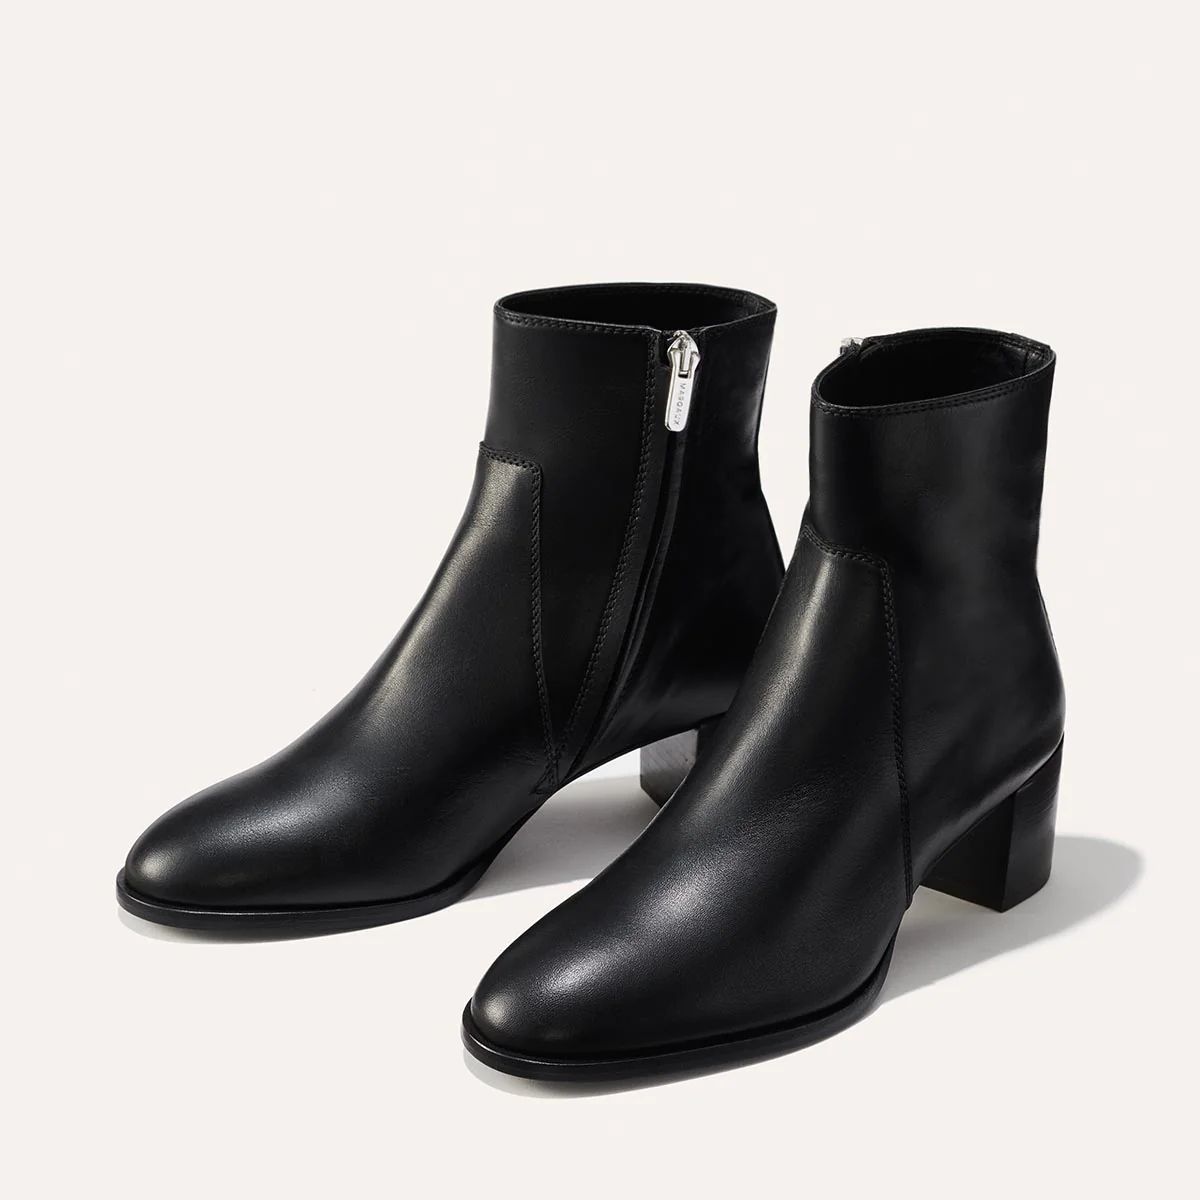 The Boot - Black Calf | Margaux